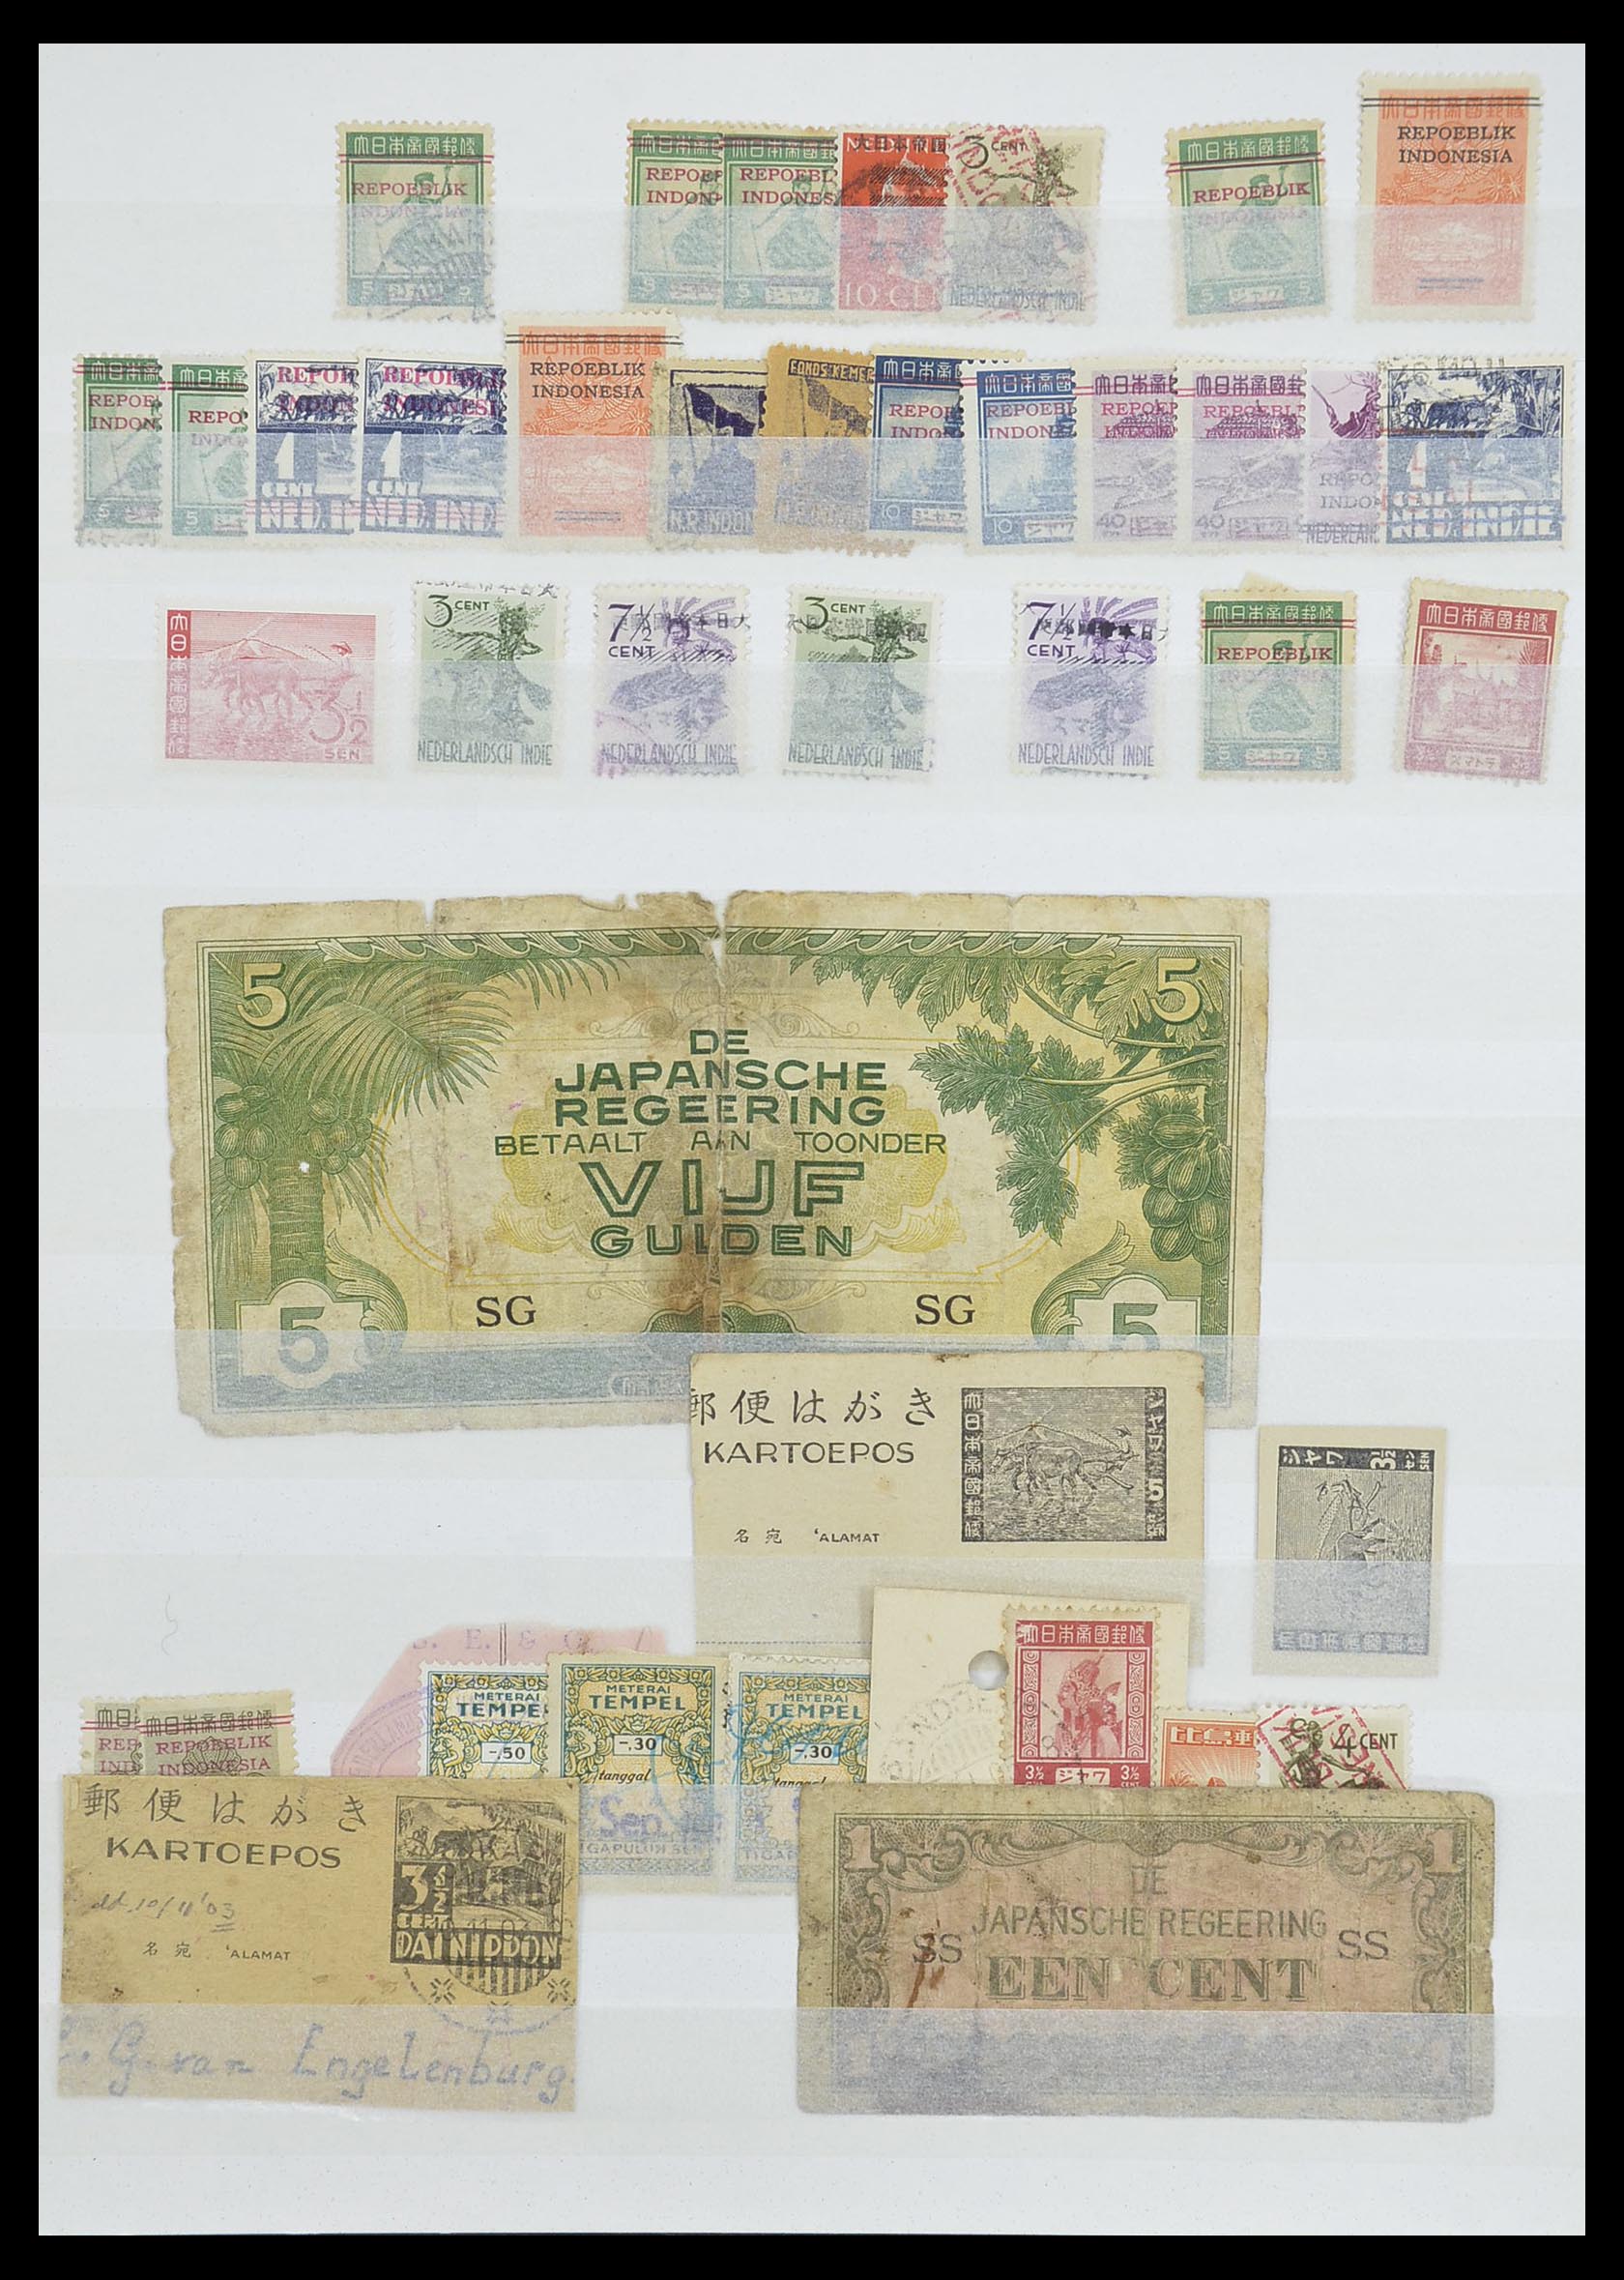 33489 012 - Stamp collection 33489 Japanese occupation Dutch east Indies and interim